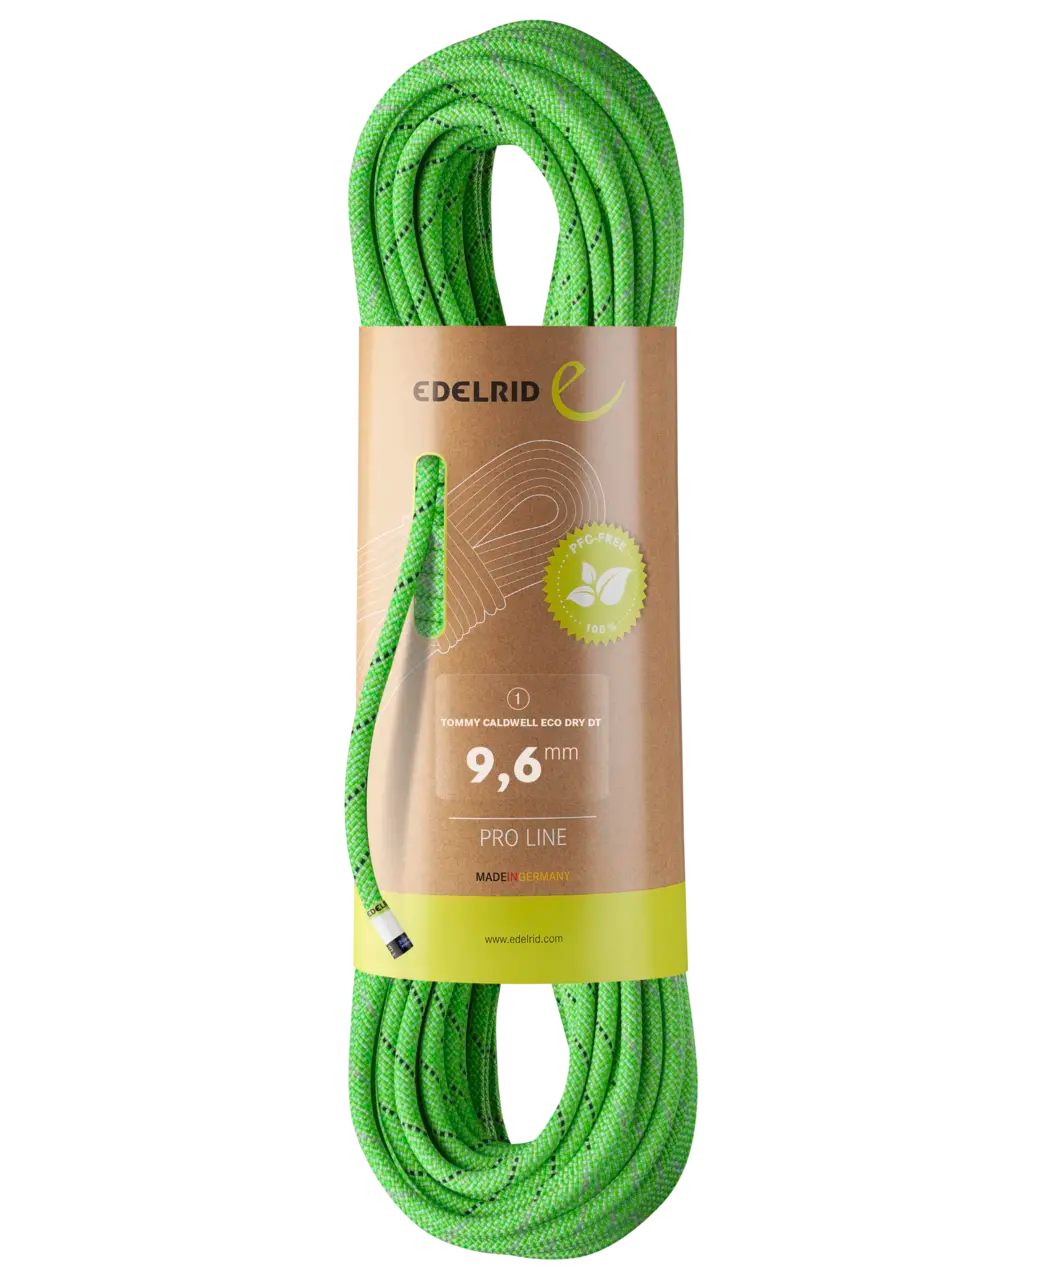 Tommy Caldwell 9.6mm Eco Dry DuoTec Rope